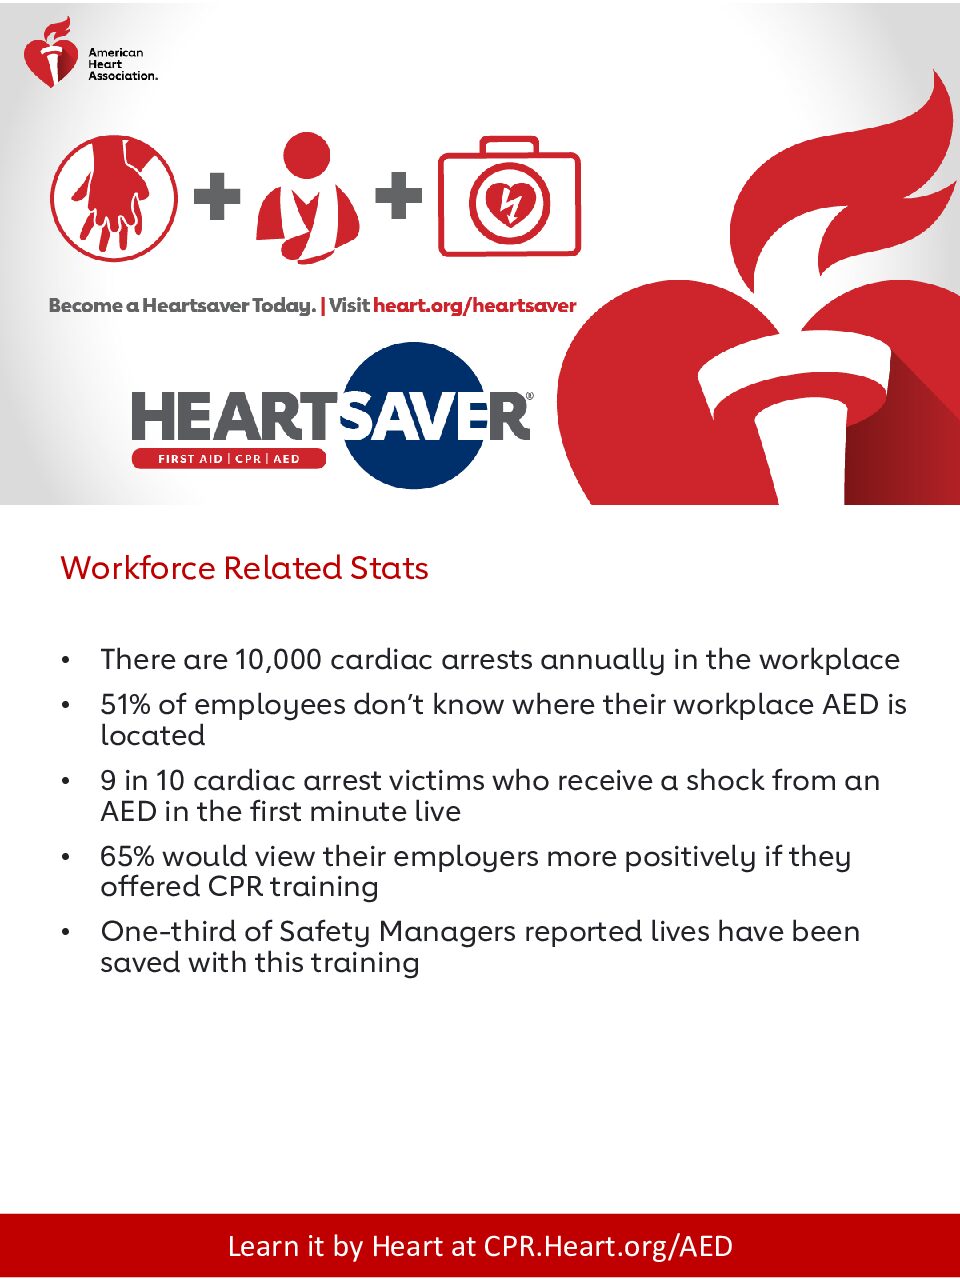 Become A Heartsaver Today!